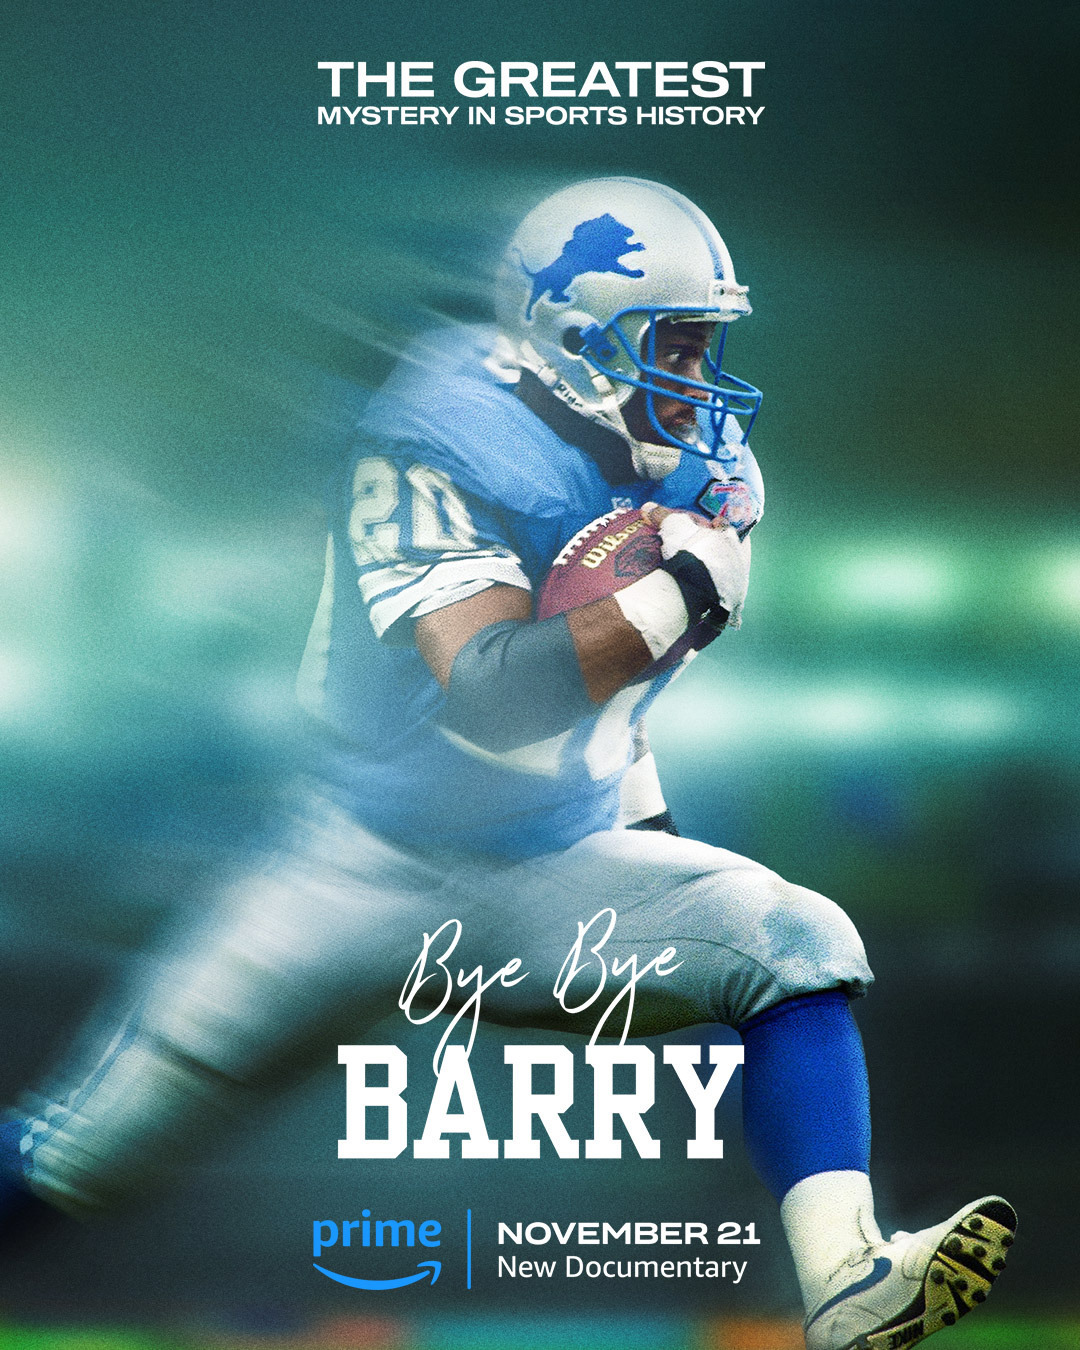 Extra Large Movie Poster Image for Bye Bye Barry 